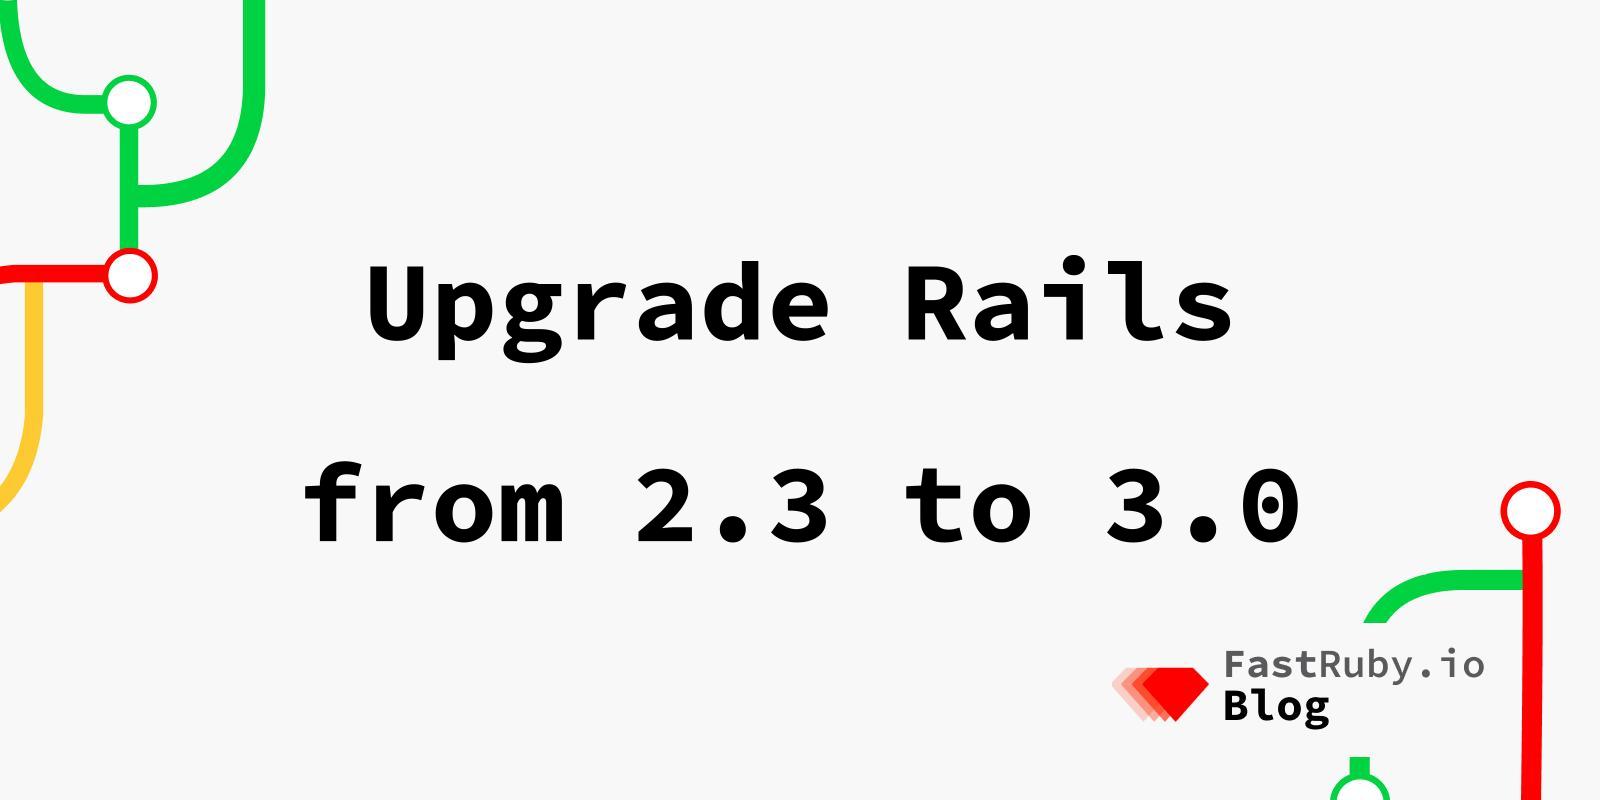 Upgrade Rails from 2.3 to 3.0